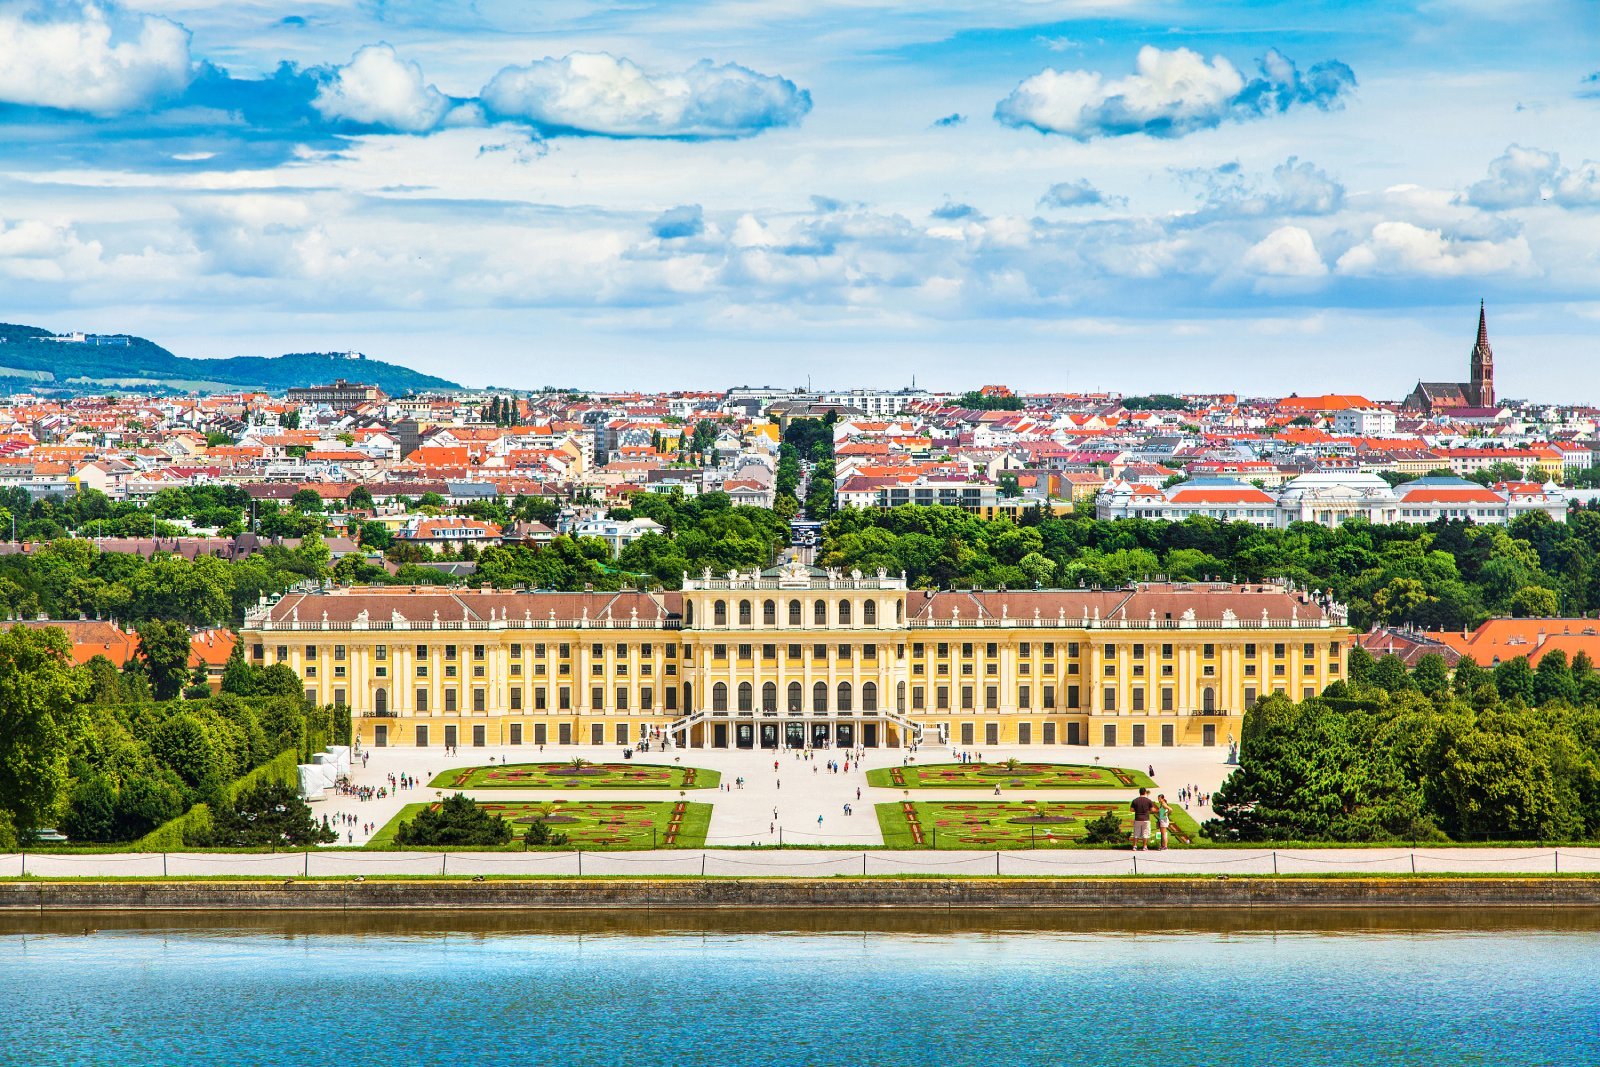 Image Credit: Shutterstock / canadastock <p>Settle into Vienna’s relaxed pace of life, where mornings start with a leisurely stroll to the local bakery for freshly baked bread and pastries. Spend afternoons exploring the city’s historic neighborhoods, from the grandeur of the Innere Stadt to the bohemian charm of Neubau, before winding down with a cozy dinner at a traditional Viennese wine tavern.</p>